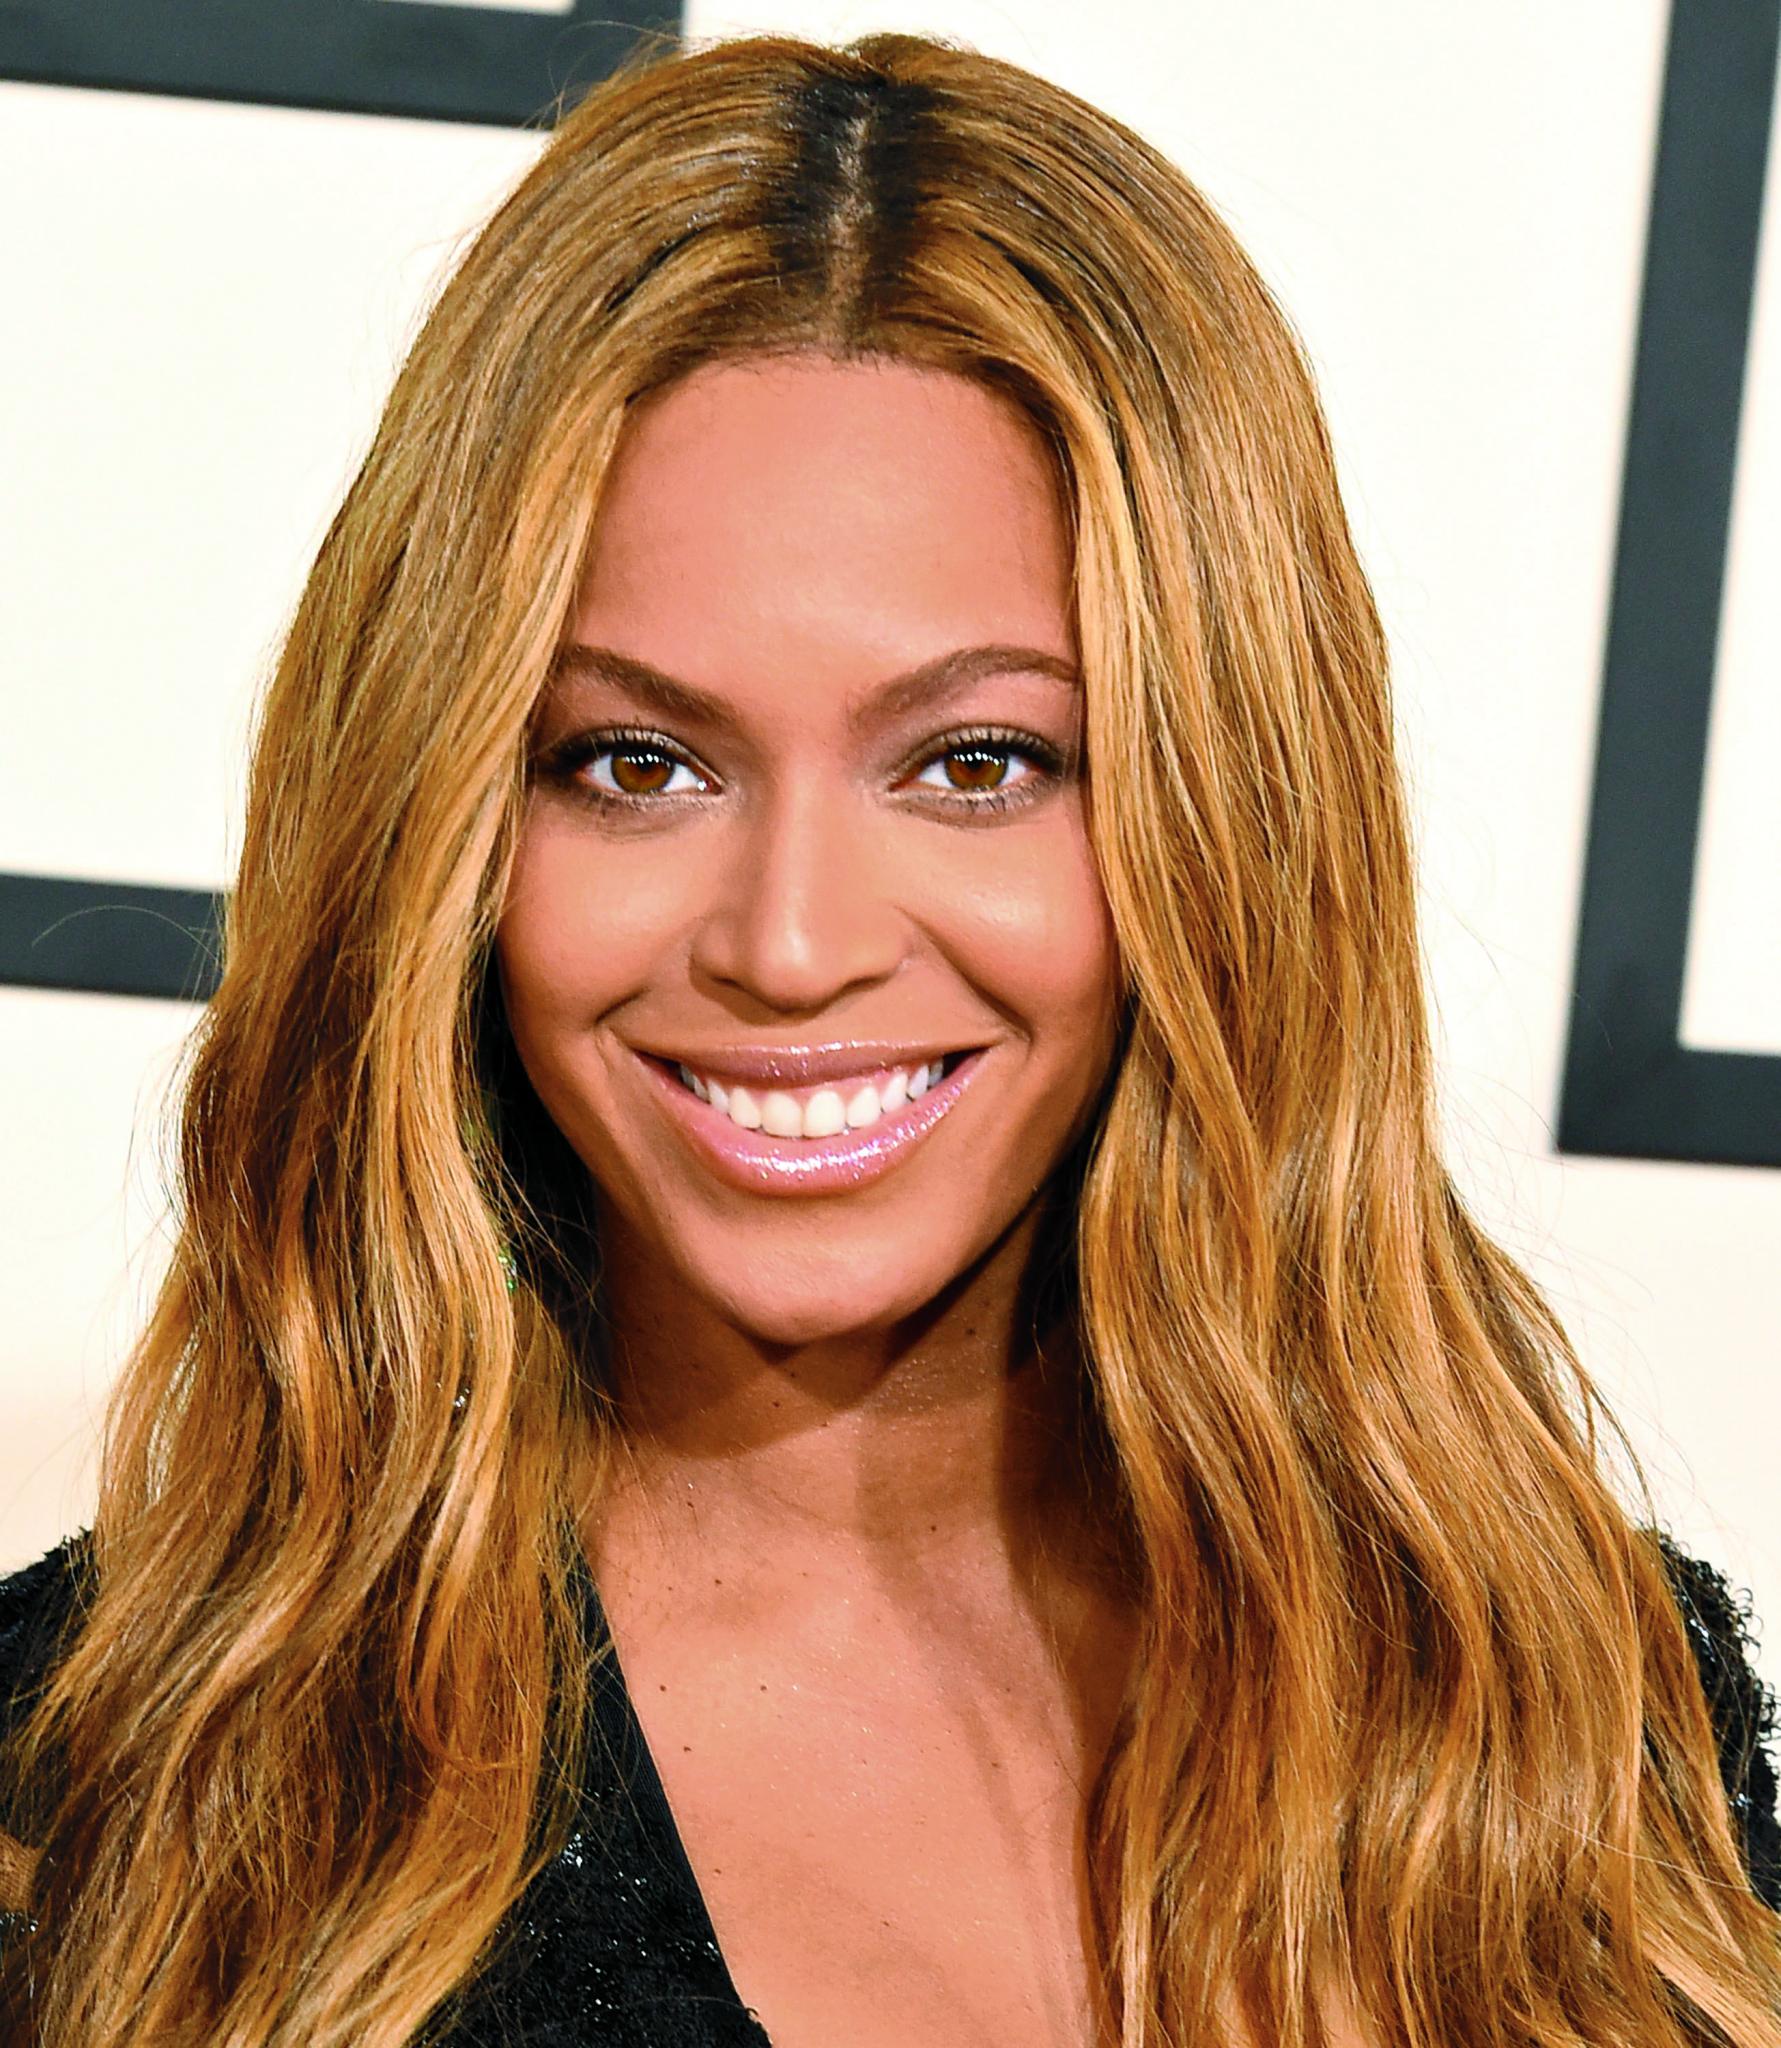 The 10 Not-So-Publicized Times Jay Z and Beyonce Gave Back